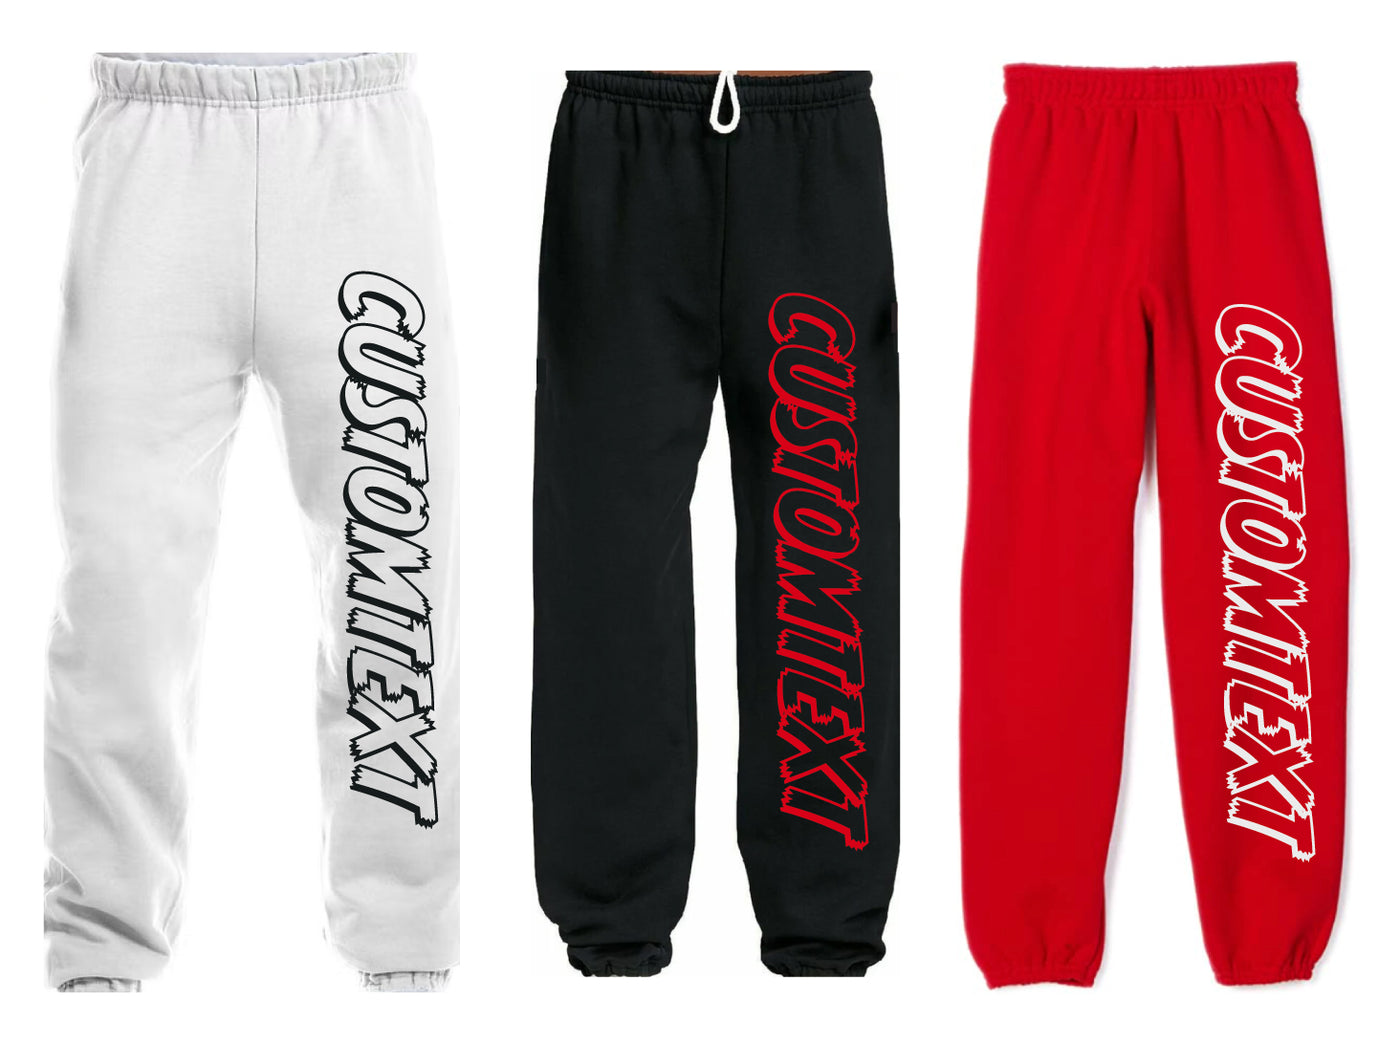 Customize Your Own Shredded Text Sweatpants